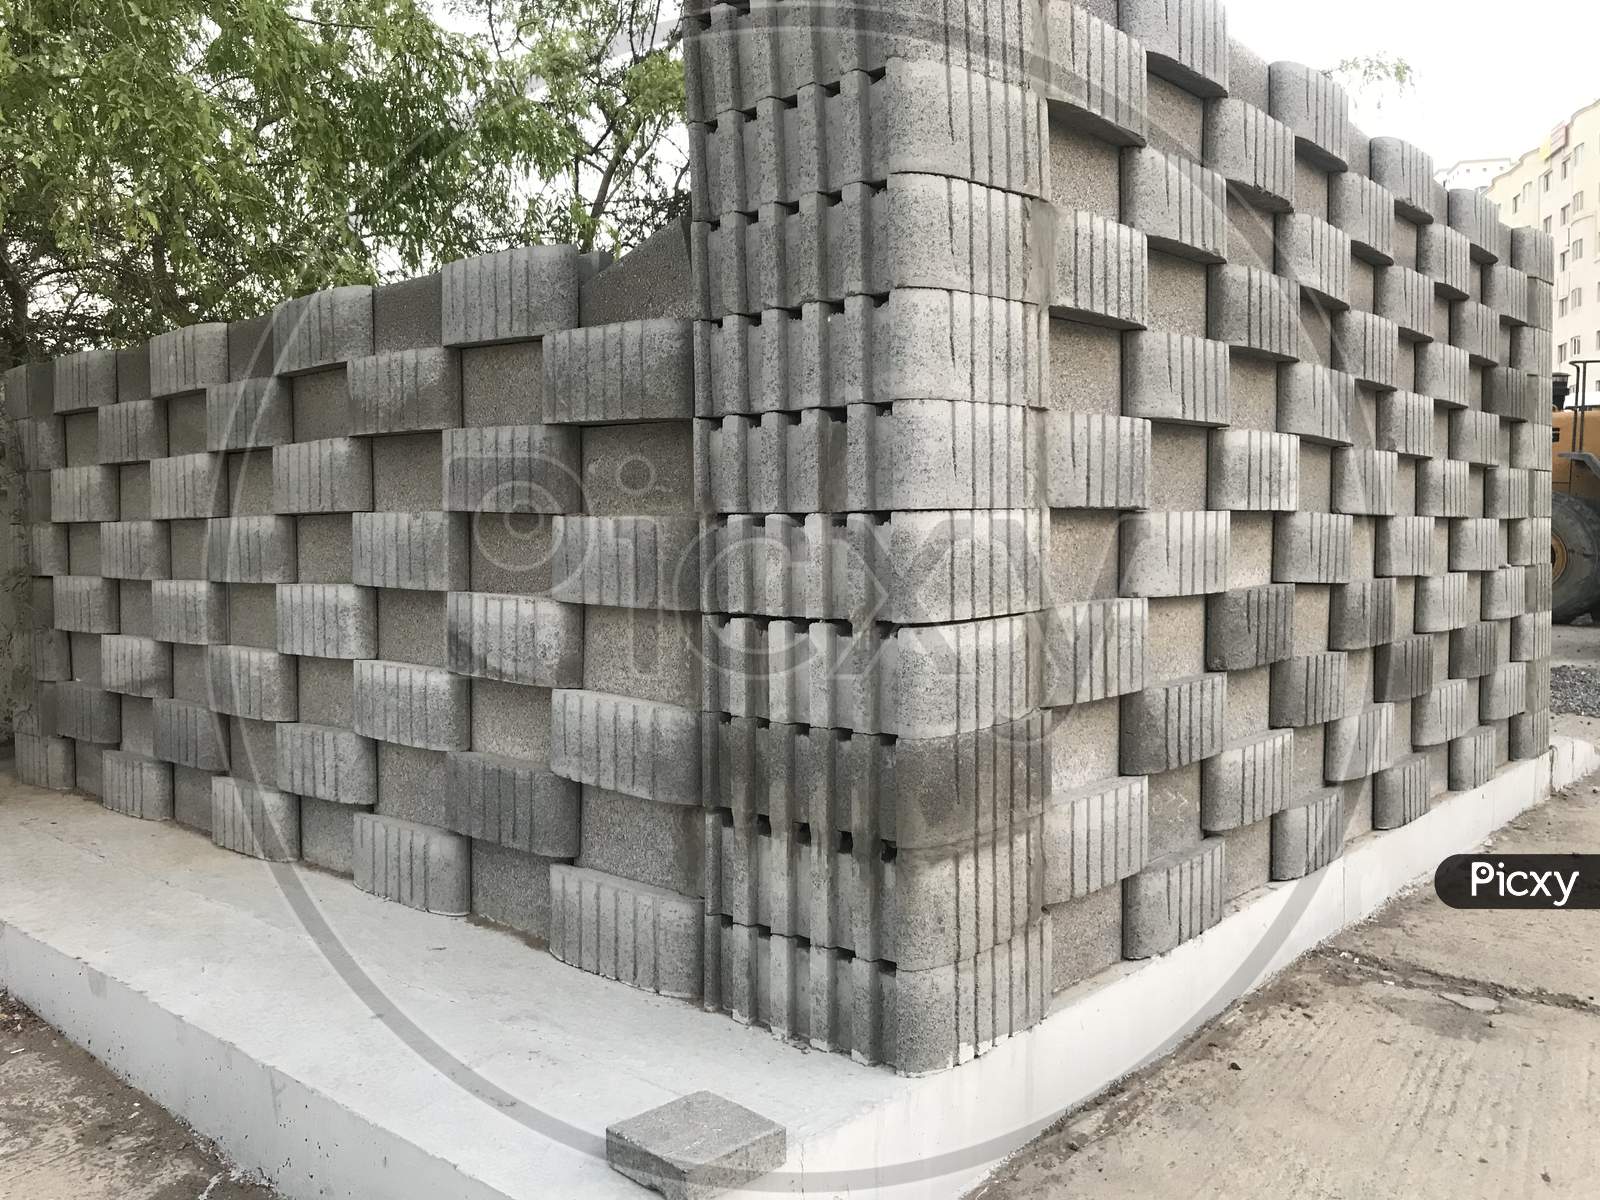 Isometric View Of Concrete Block Wall Constructed For Public Toilet In Three Dimensional View Like In And Out Pattern Using Blocks Cement And Sand